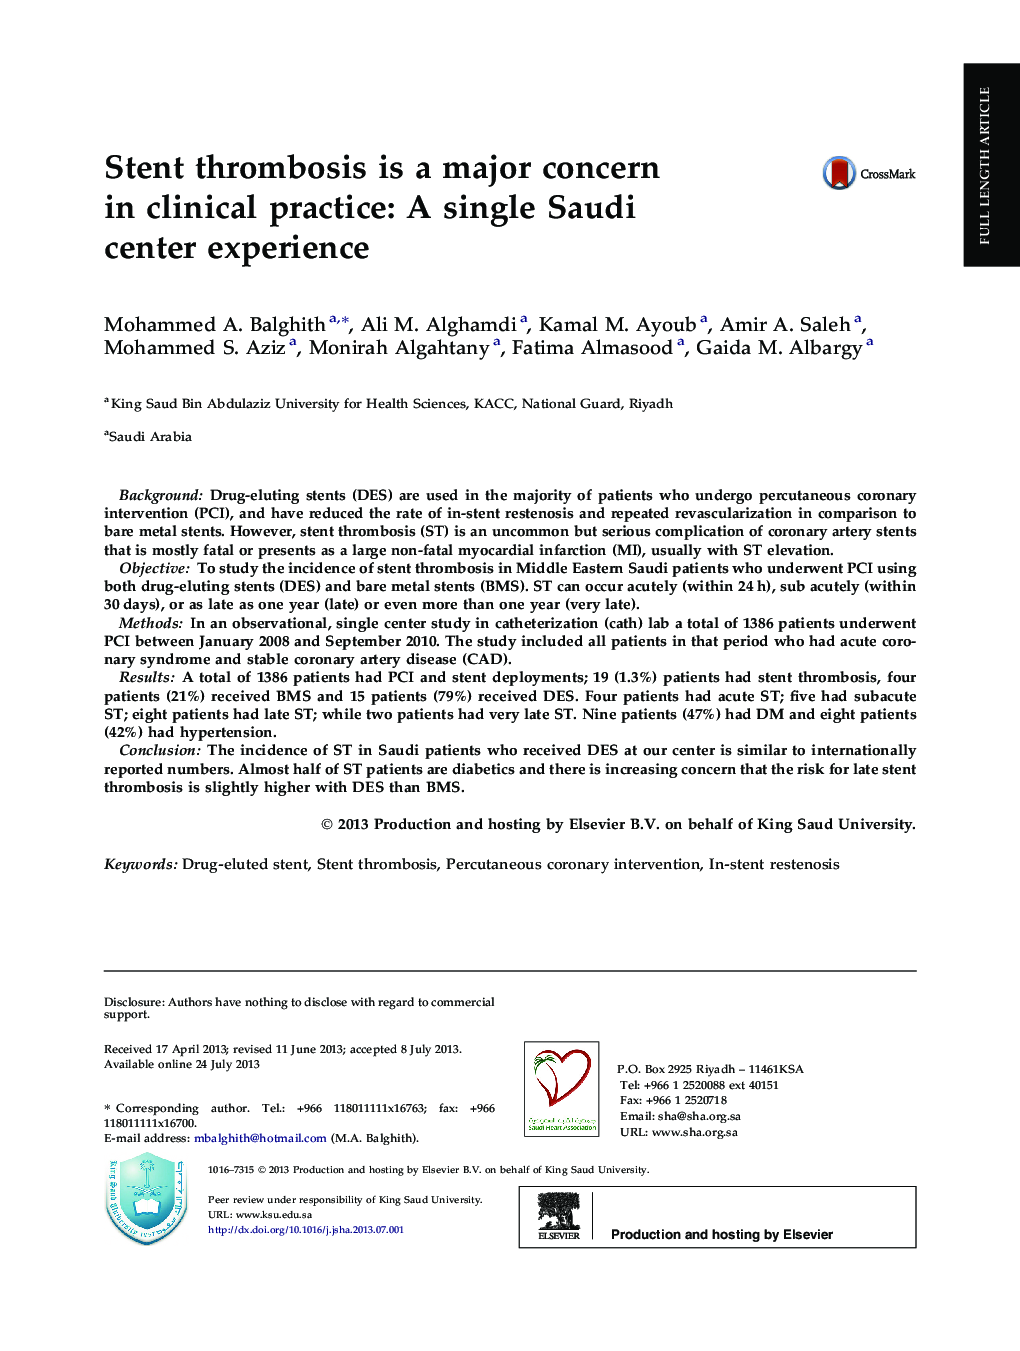 Stent thrombosis is a major concern in clinical practice: A single Saudi center experience 